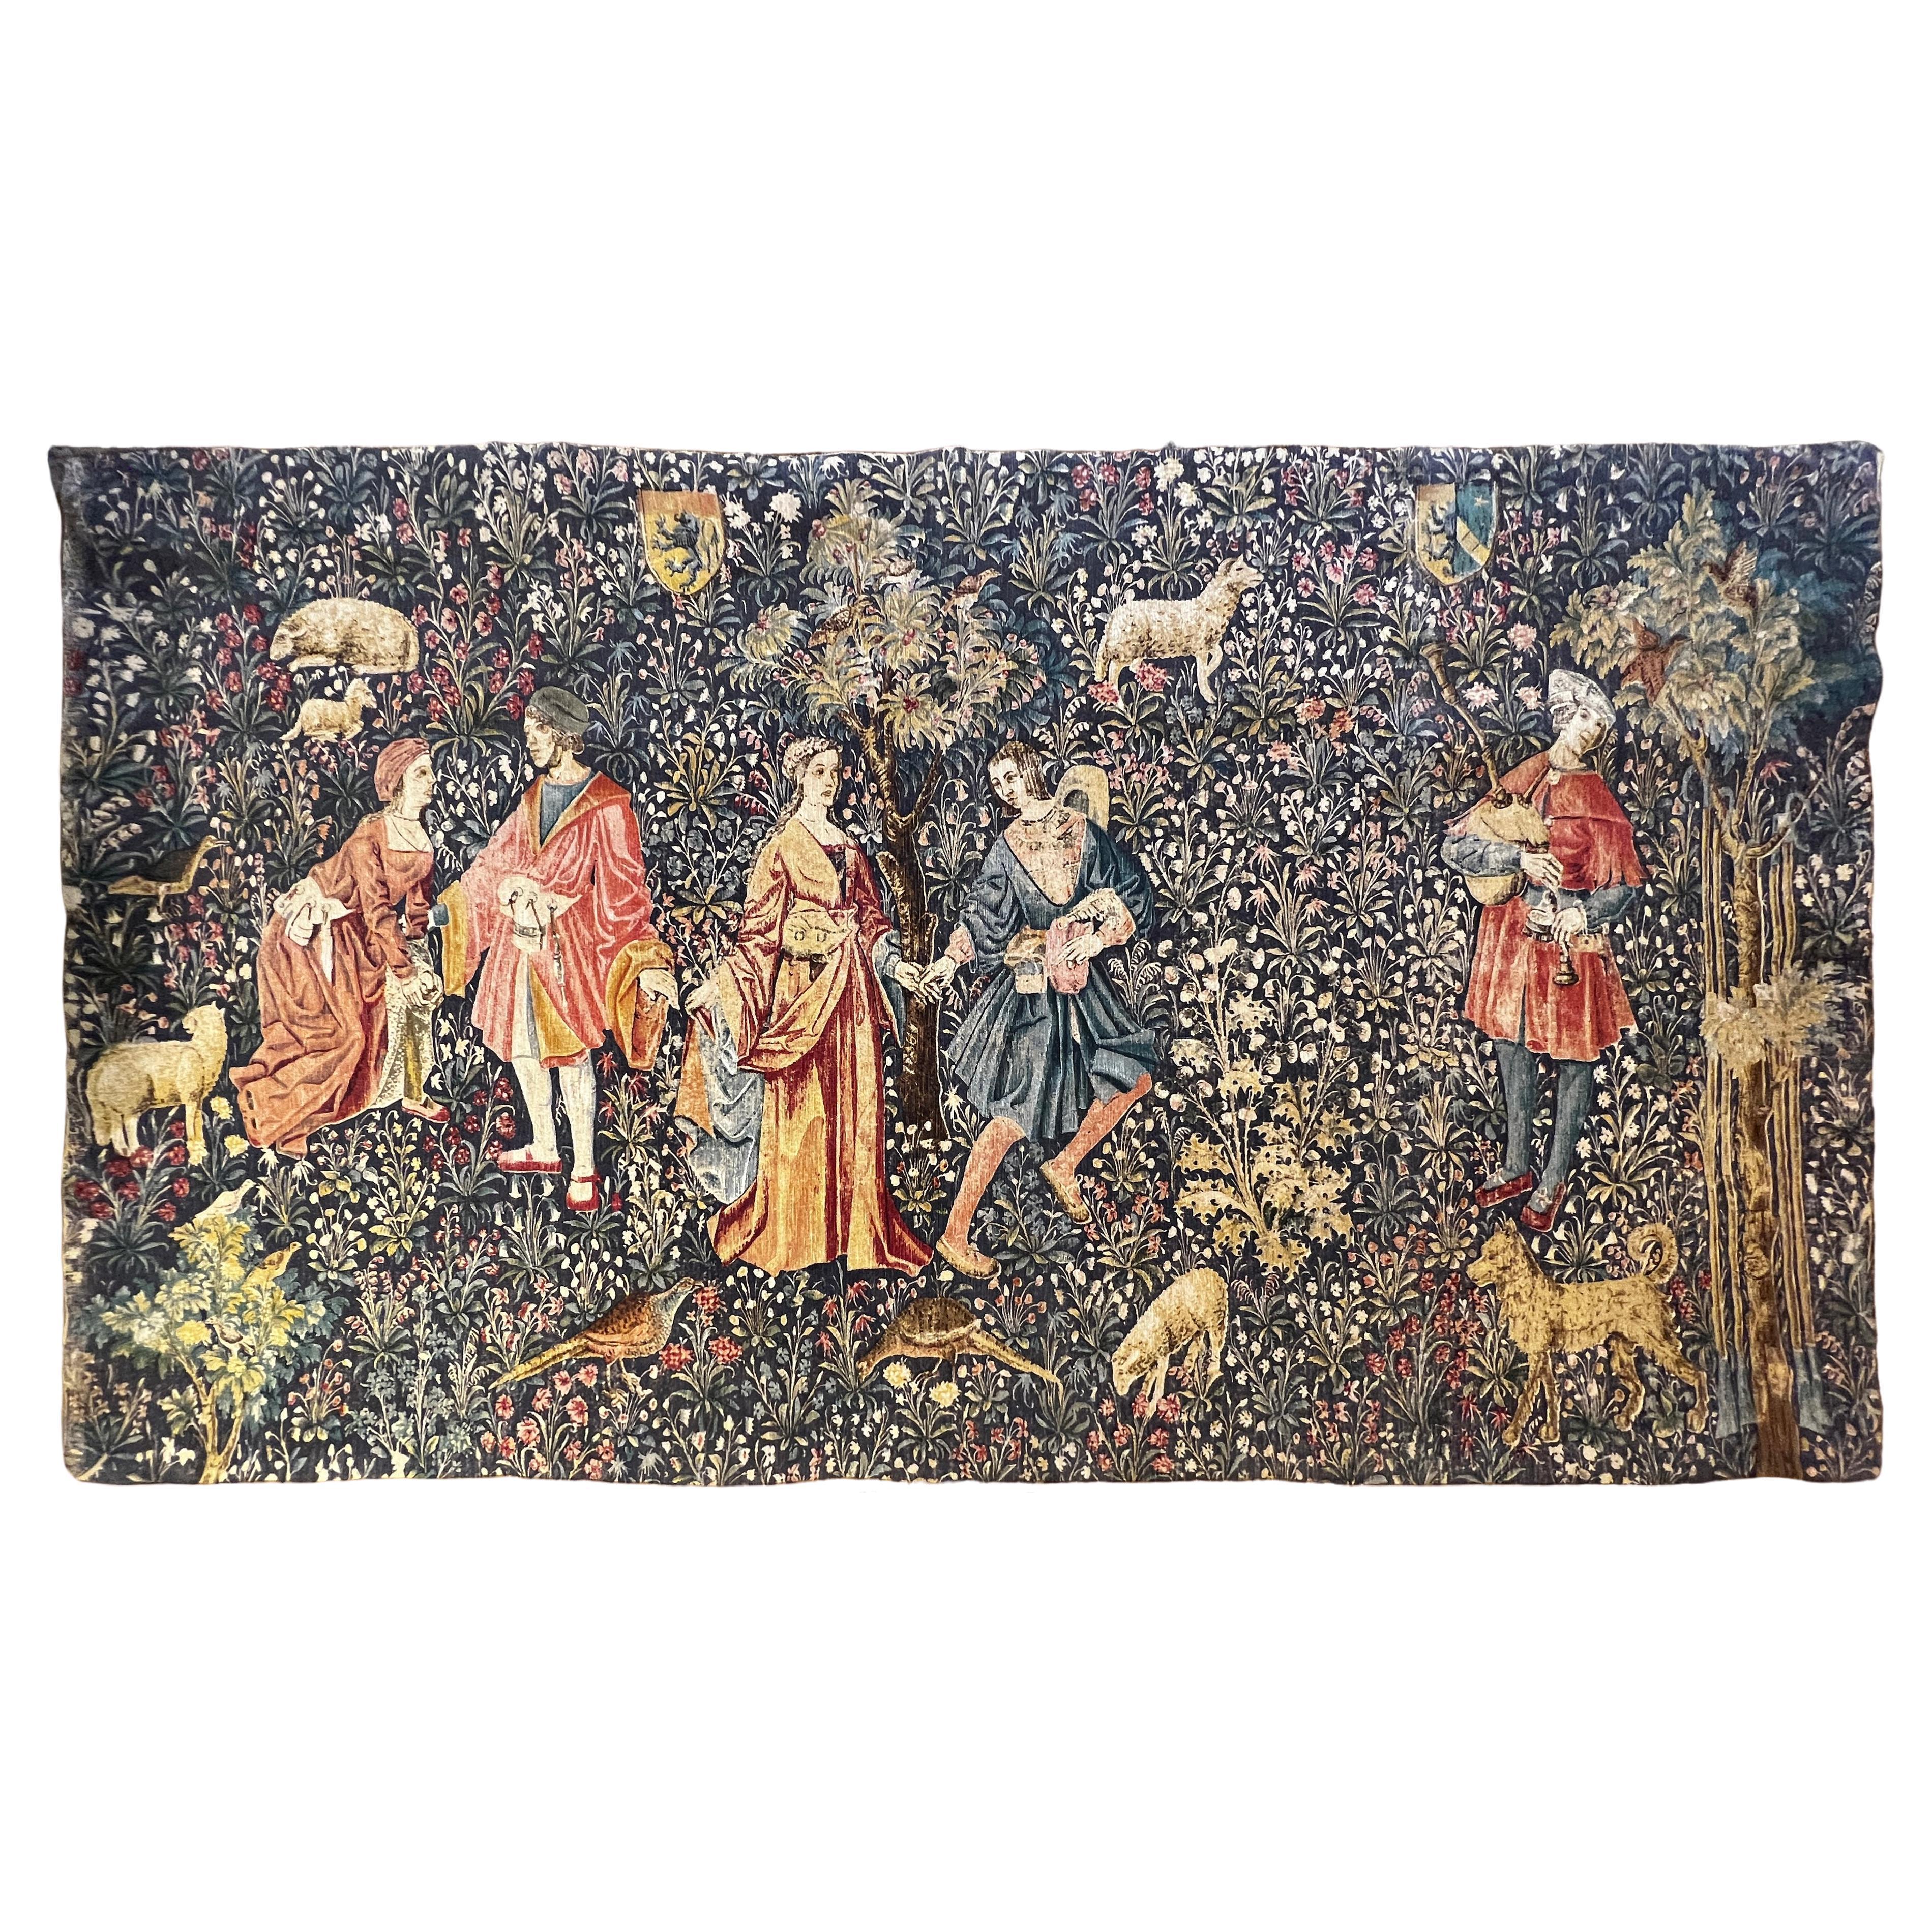 983 - Beautiful Jaquar Tapestry Vintage Aubusson Style Medieval Design For Sale